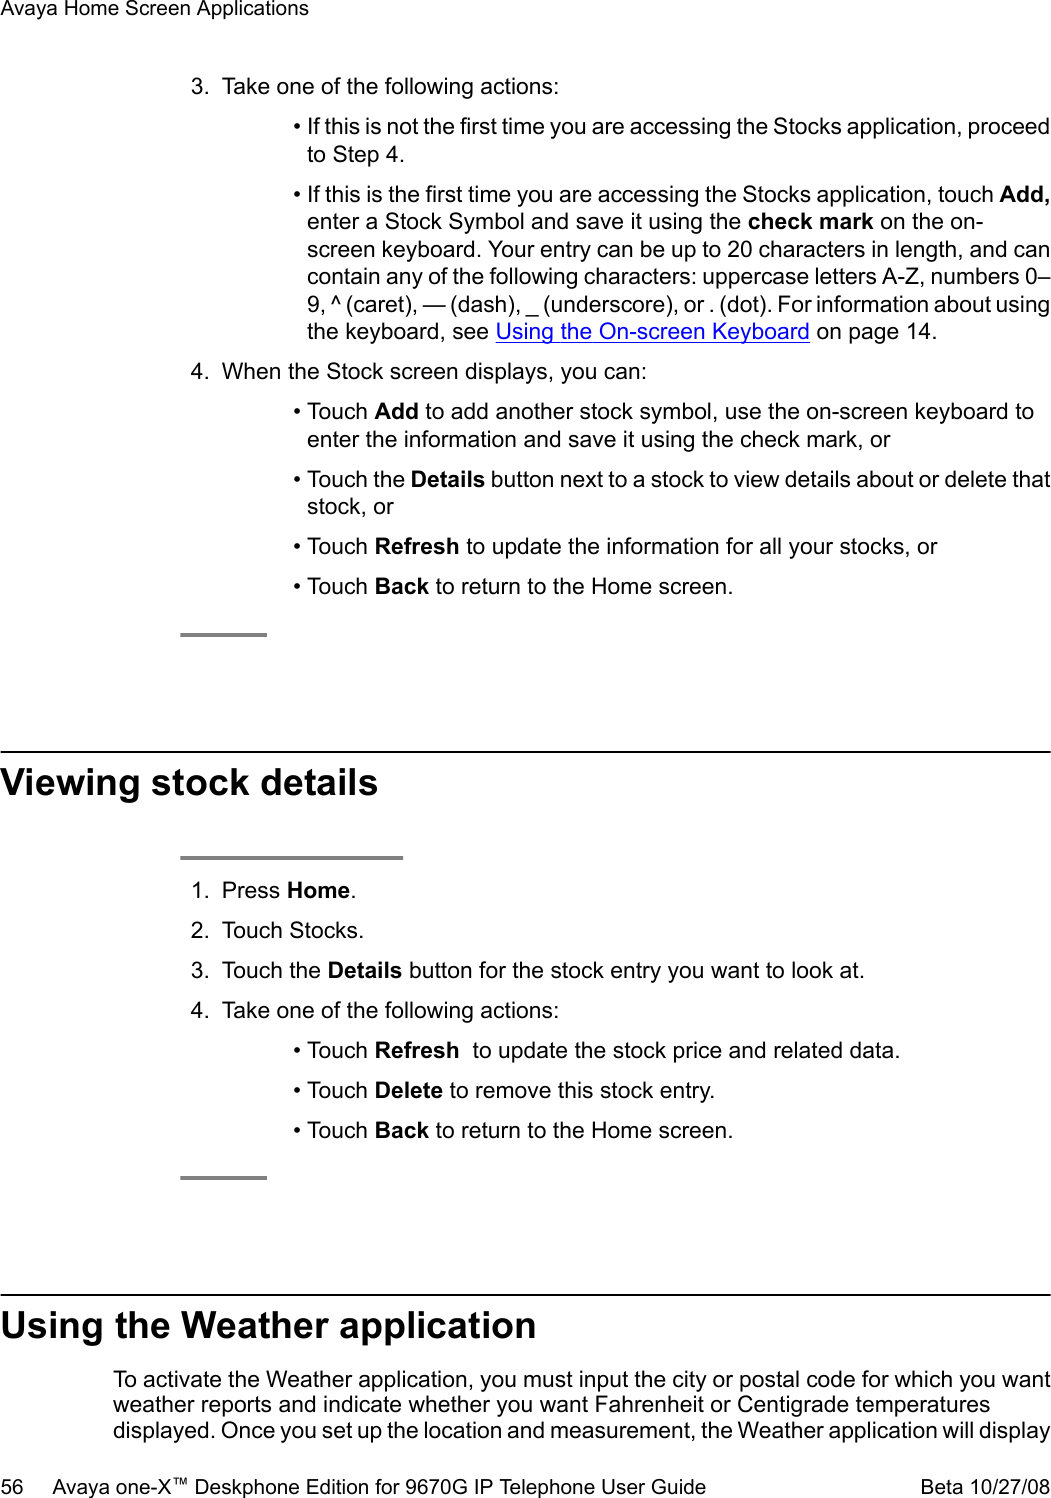 3. Take one of the following actions:• If this is not the first time you are accessing the Stocks application, proceedto Step 4.• If this is the first time you are accessing the Stocks application, touch Add,enter a Stock Symbol and save it using the check mark on the on-screen keyboard. Your entry can be up to 20 characters in length, and cancontain any of the following characters: uppercase letters A-Z, numbers 0–9, ^ (caret), — (dash), _ (underscore), or . (dot). For information about usingthe keyboard, see Using the On-screen Keyboard on page 14.4. When the Stock screen displays, you can:• Touch Add to add another stock symbol, use the on-screen keyboard toenter the information and save it using the check mark, or• Touch the Details button next to a stock to view details about or delete thatstock, or• Touch Refresh to update the information for all your stocks, or• Touch Back to return to the Home screen.Viewing stock details1. Press Home.2. Touch Stocks.3. Touch the Details button for the stock entry you want to look at.4. Take one of the following actions:• Touch Refresh  to update the stock price and related data.• Touch Delete to remove this stock entry.• Touch Back to return to the Home screen.Using the Weather applicationTo activate the Weather application, you must input the city or postal code for which you wantweather reports and indicate whether you want Fahrenheit or Centigrade temperaturesdisplayed. Once you set up the location and measurement, the Weather application will displayAvaya Home Screen Applications56     Avaya one-X™ Deskphone Edition for 9670G IP Telephone User Guide Beta 10/27/08